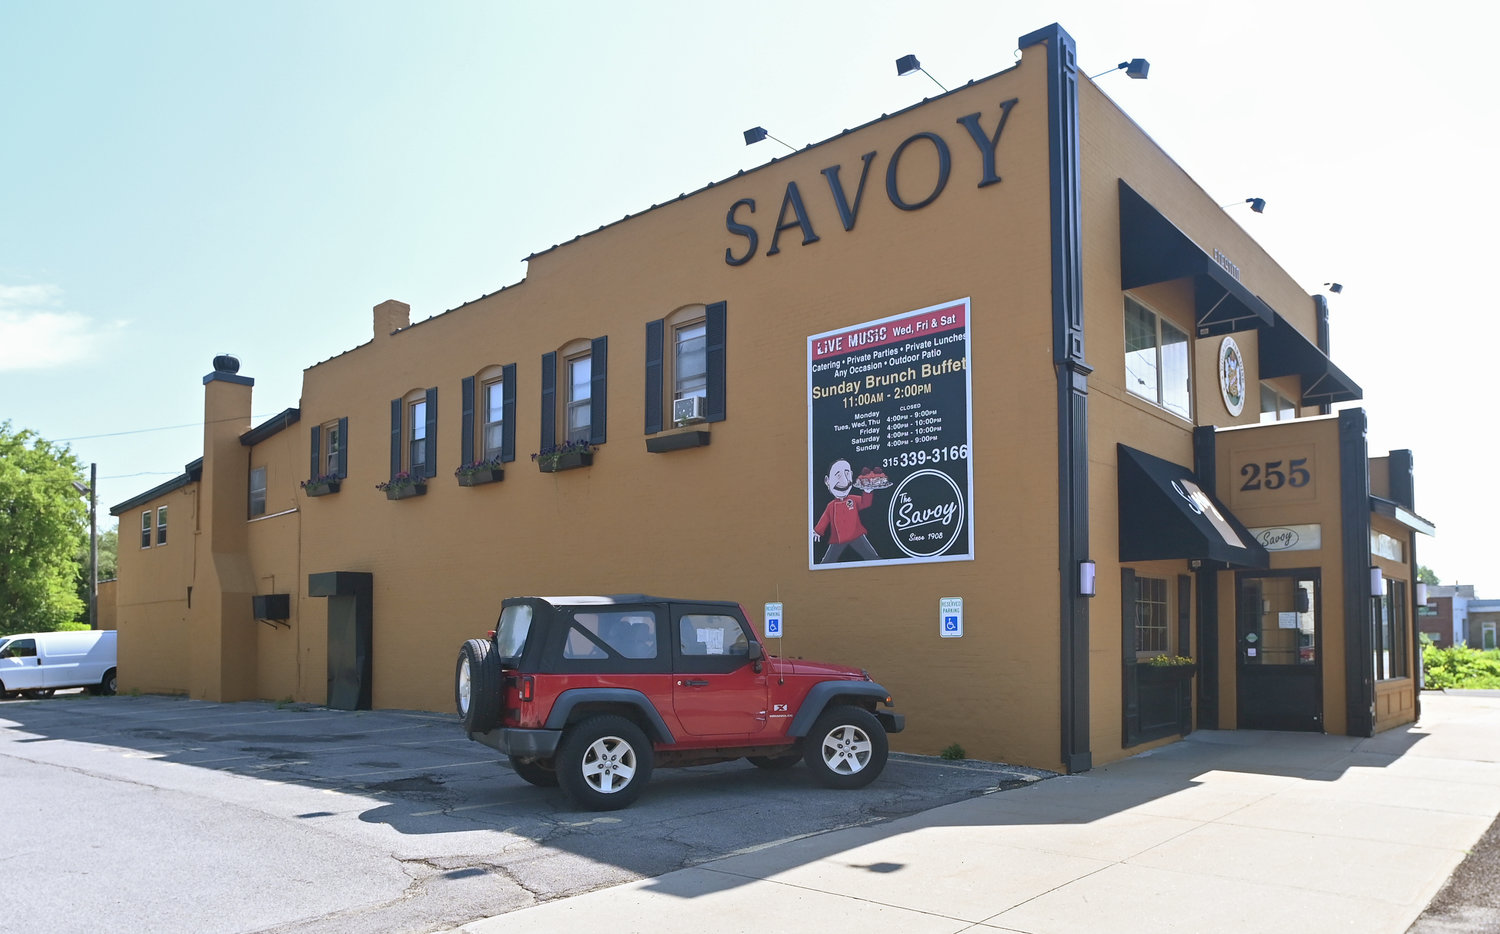 The Savoy, 255 East Dominick St. in Rome, is closing its doors for good and is currently on the market for $899,900. Orrie Destito, who along with his brothers owns the family business, said the decision to end 114 years of service to the community was not made lightly.